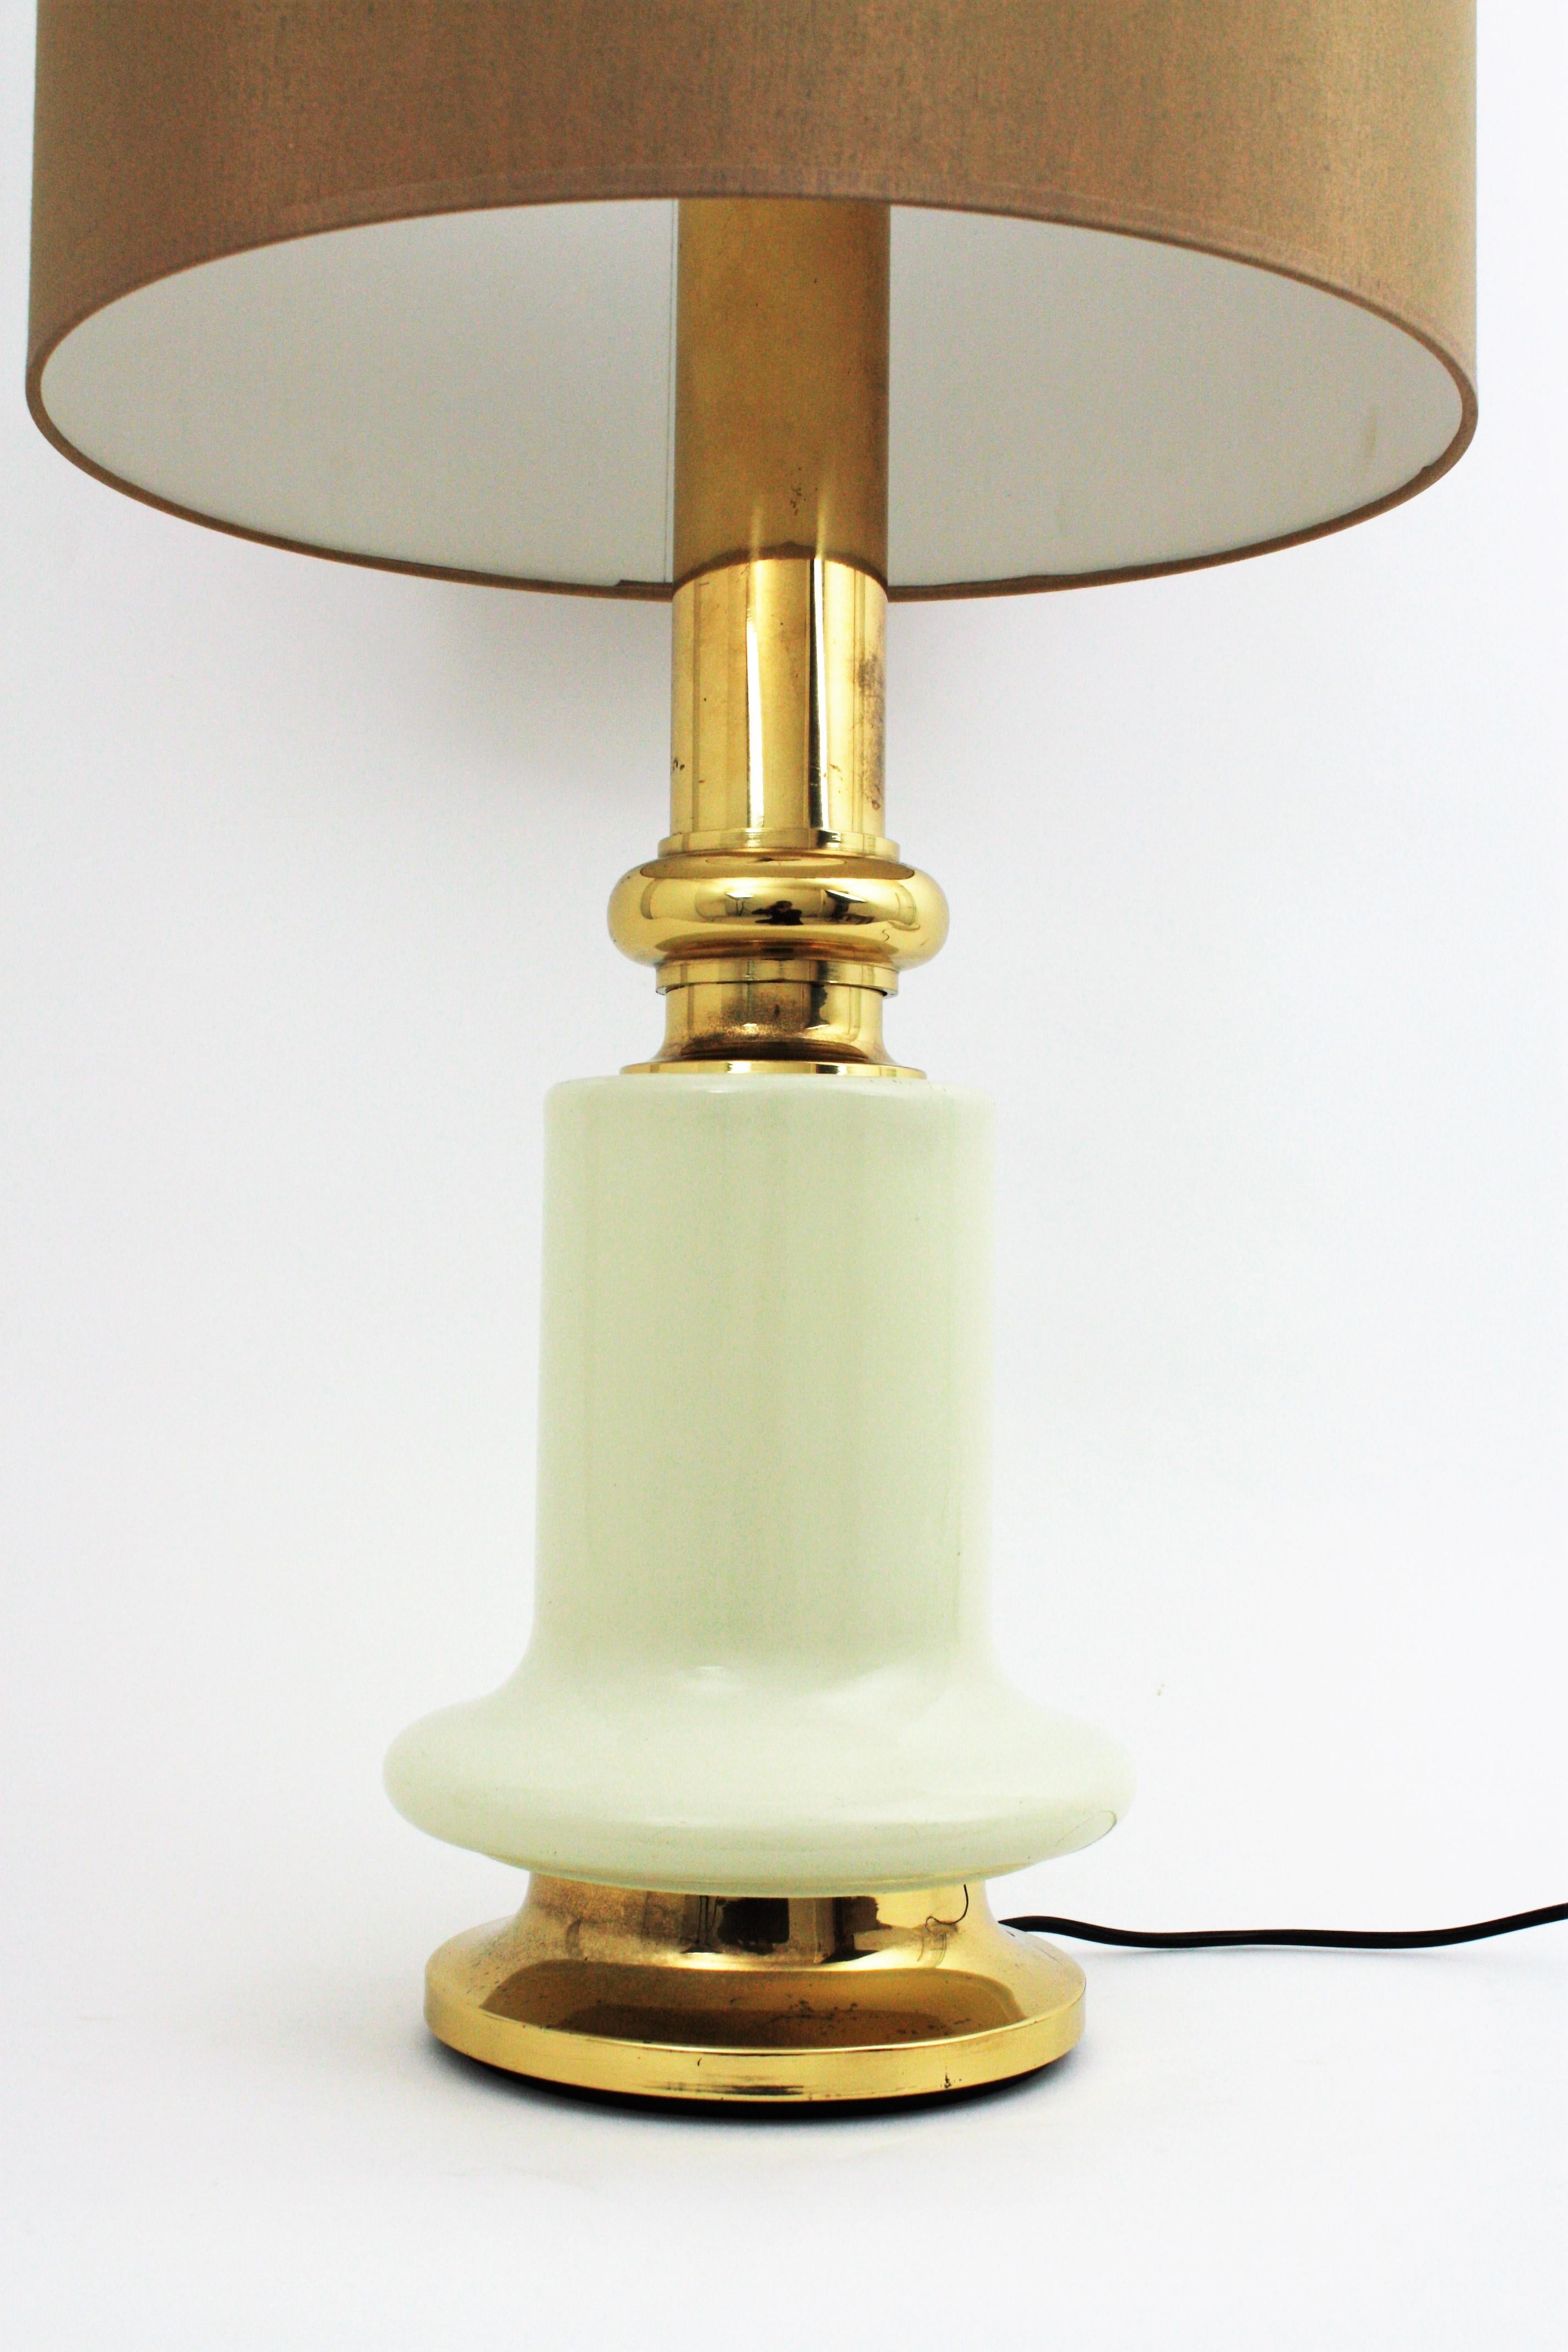 20th Century Large Brass and Ivory Lacquer Table Lamp, Spain, 1960s For Sale